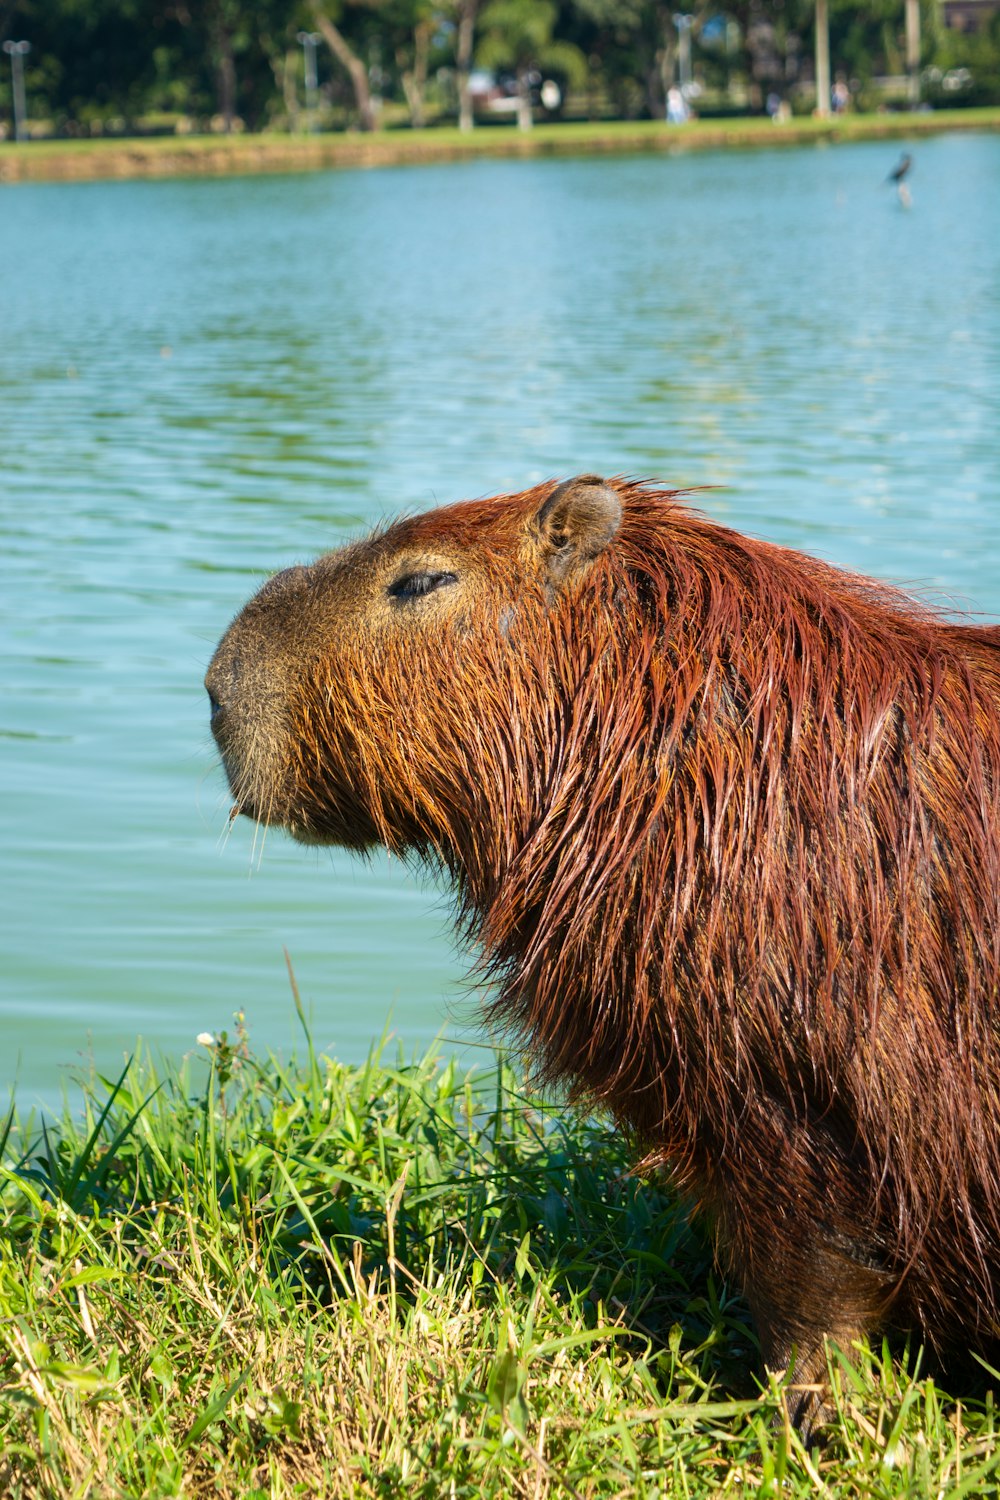 a close up of a animal near a body of water